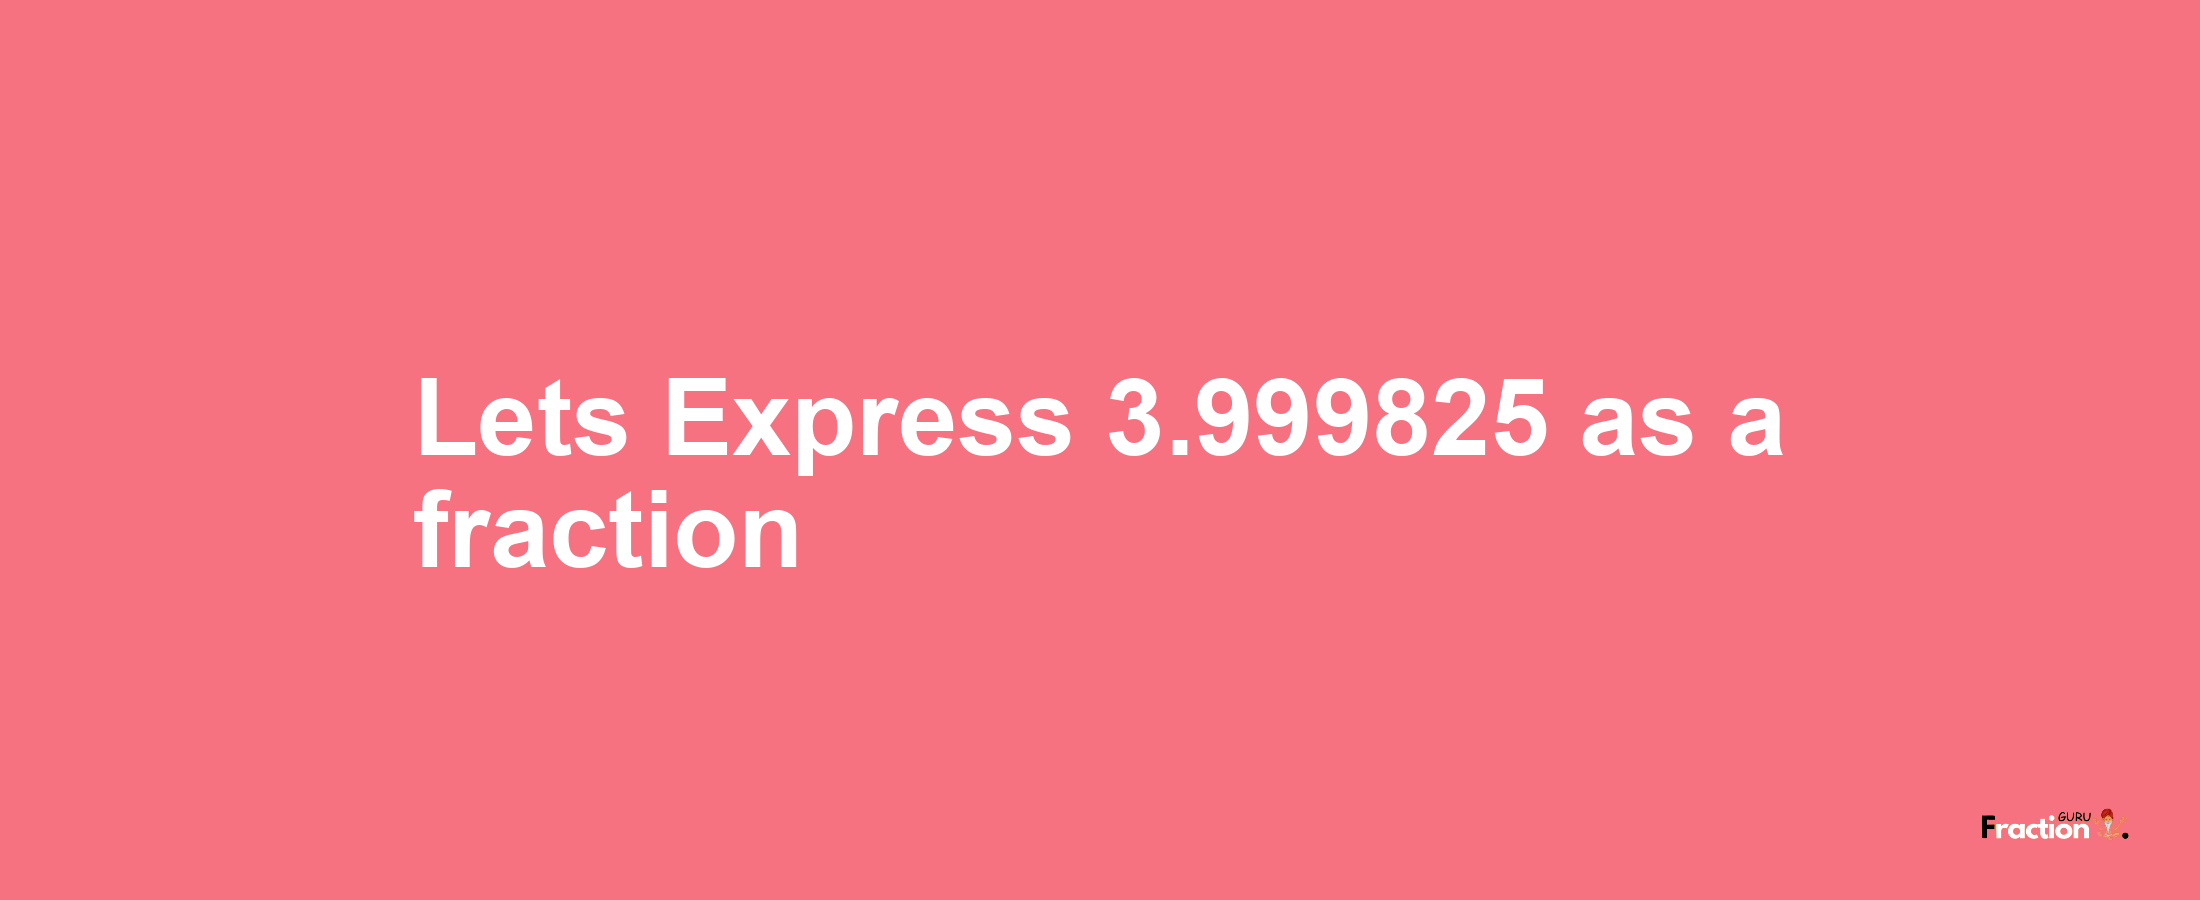 Lets Express 3.999825 as afraction